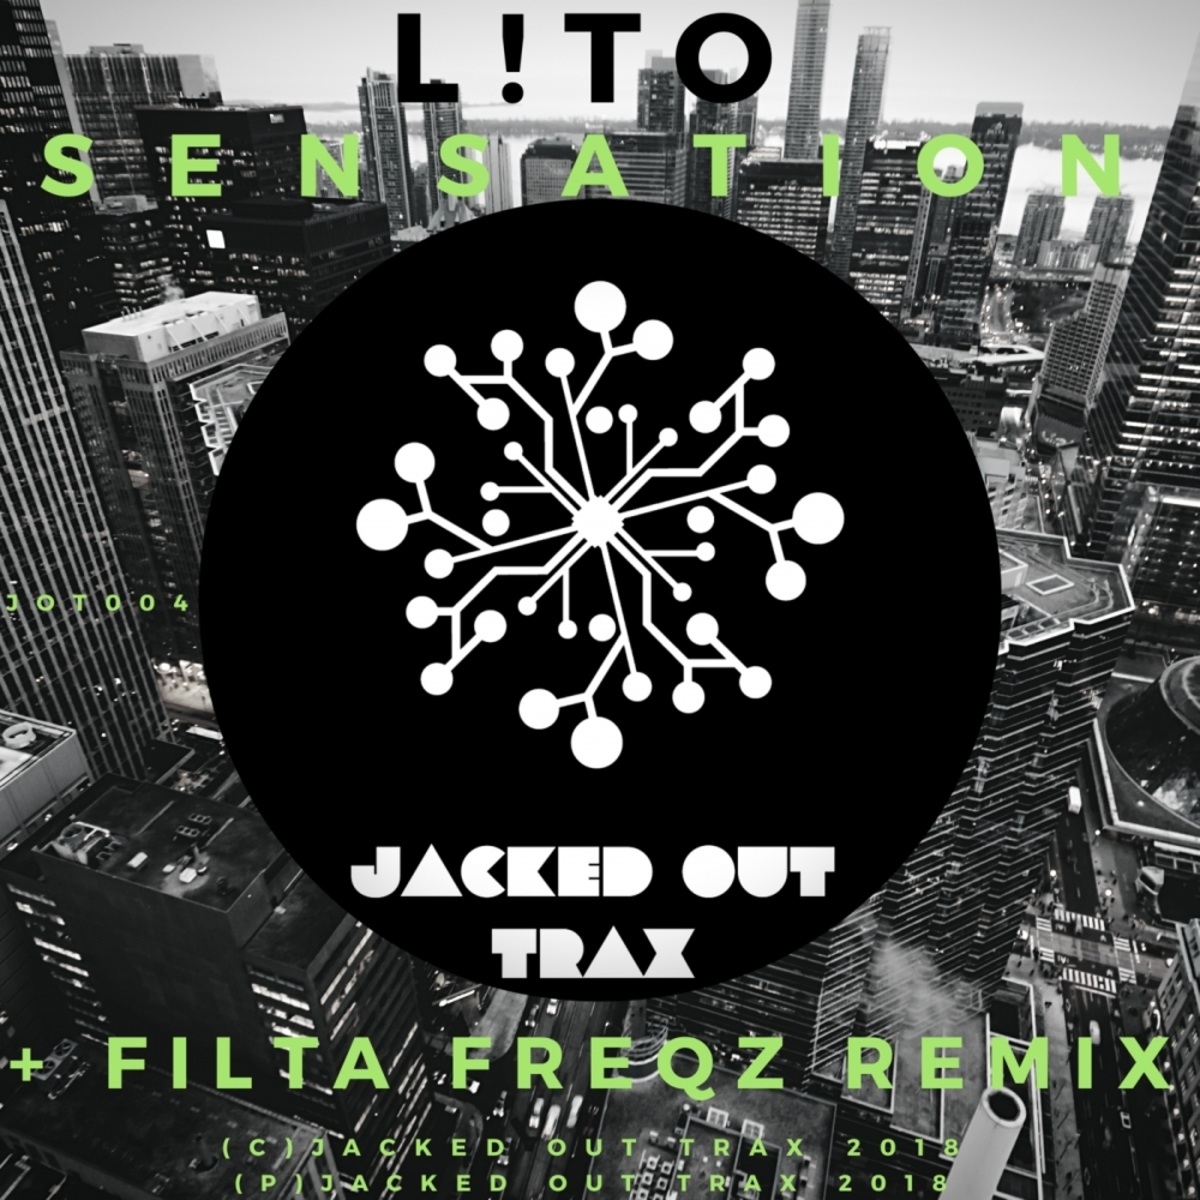 L!TO - Sensation / Jacked Out Trax